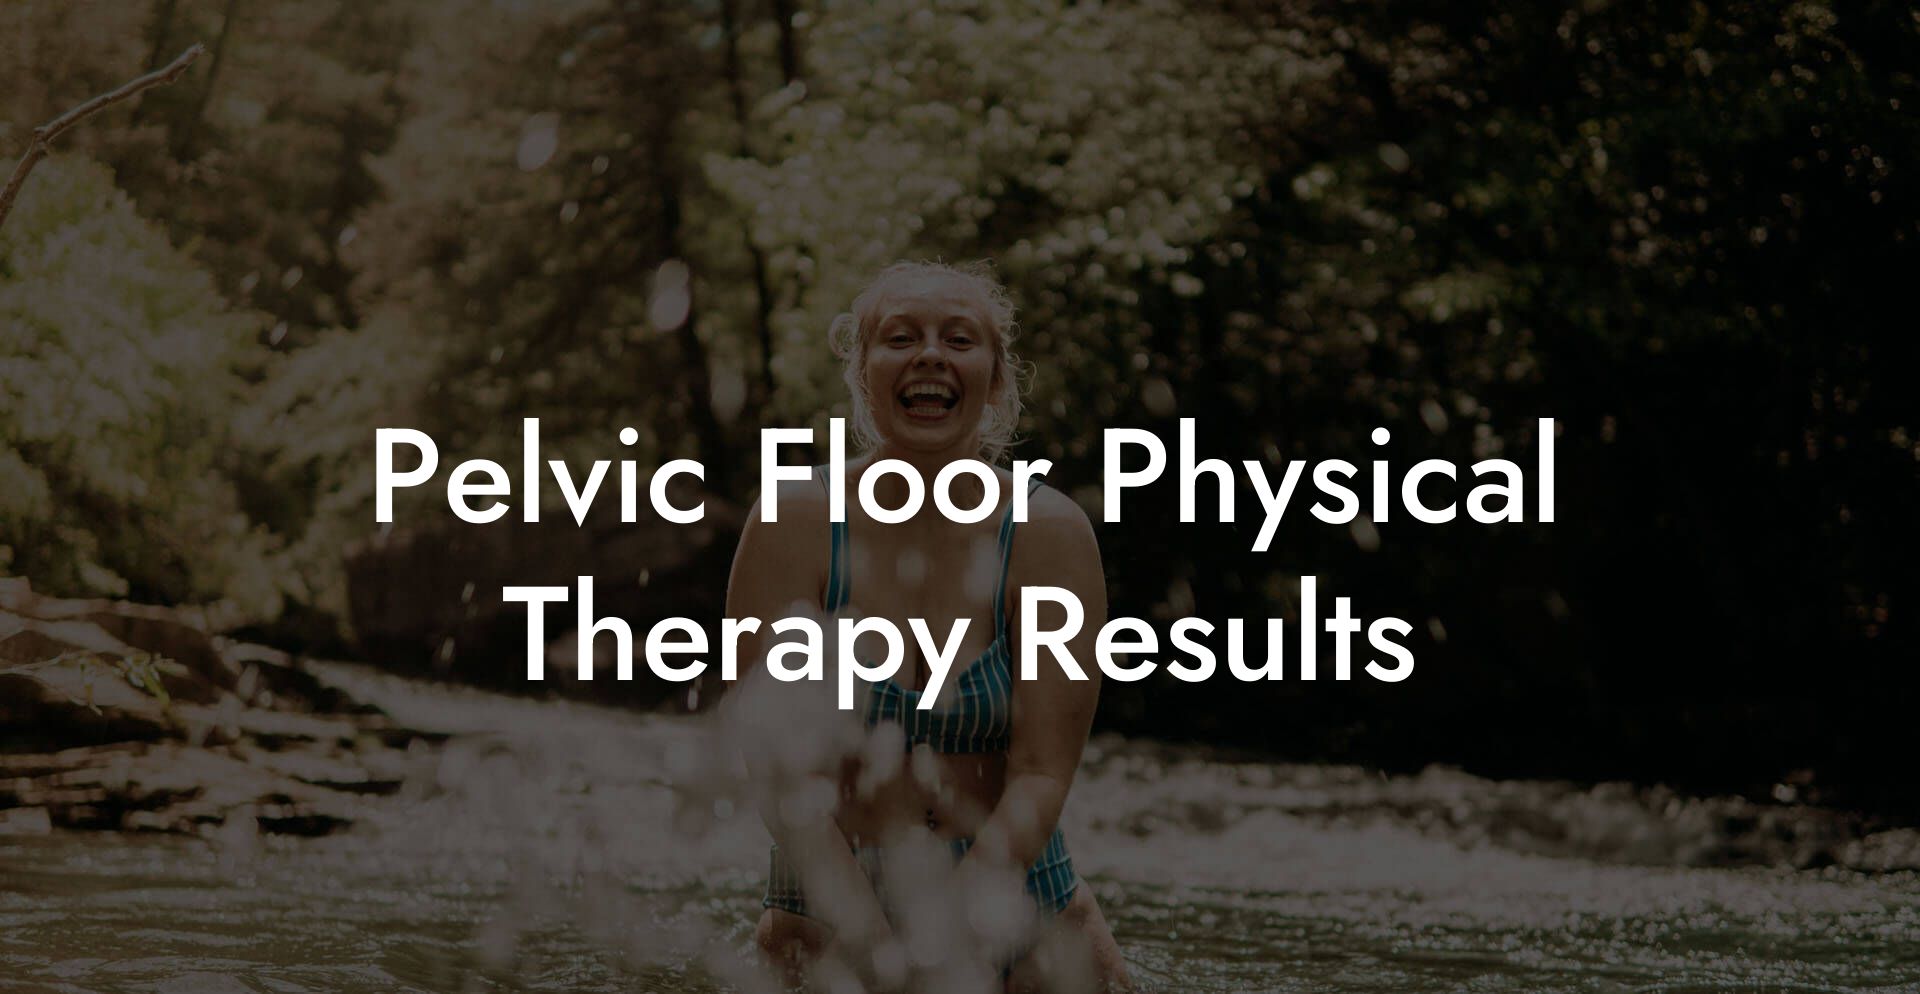 Pelvic Floor Physical Therapy Results